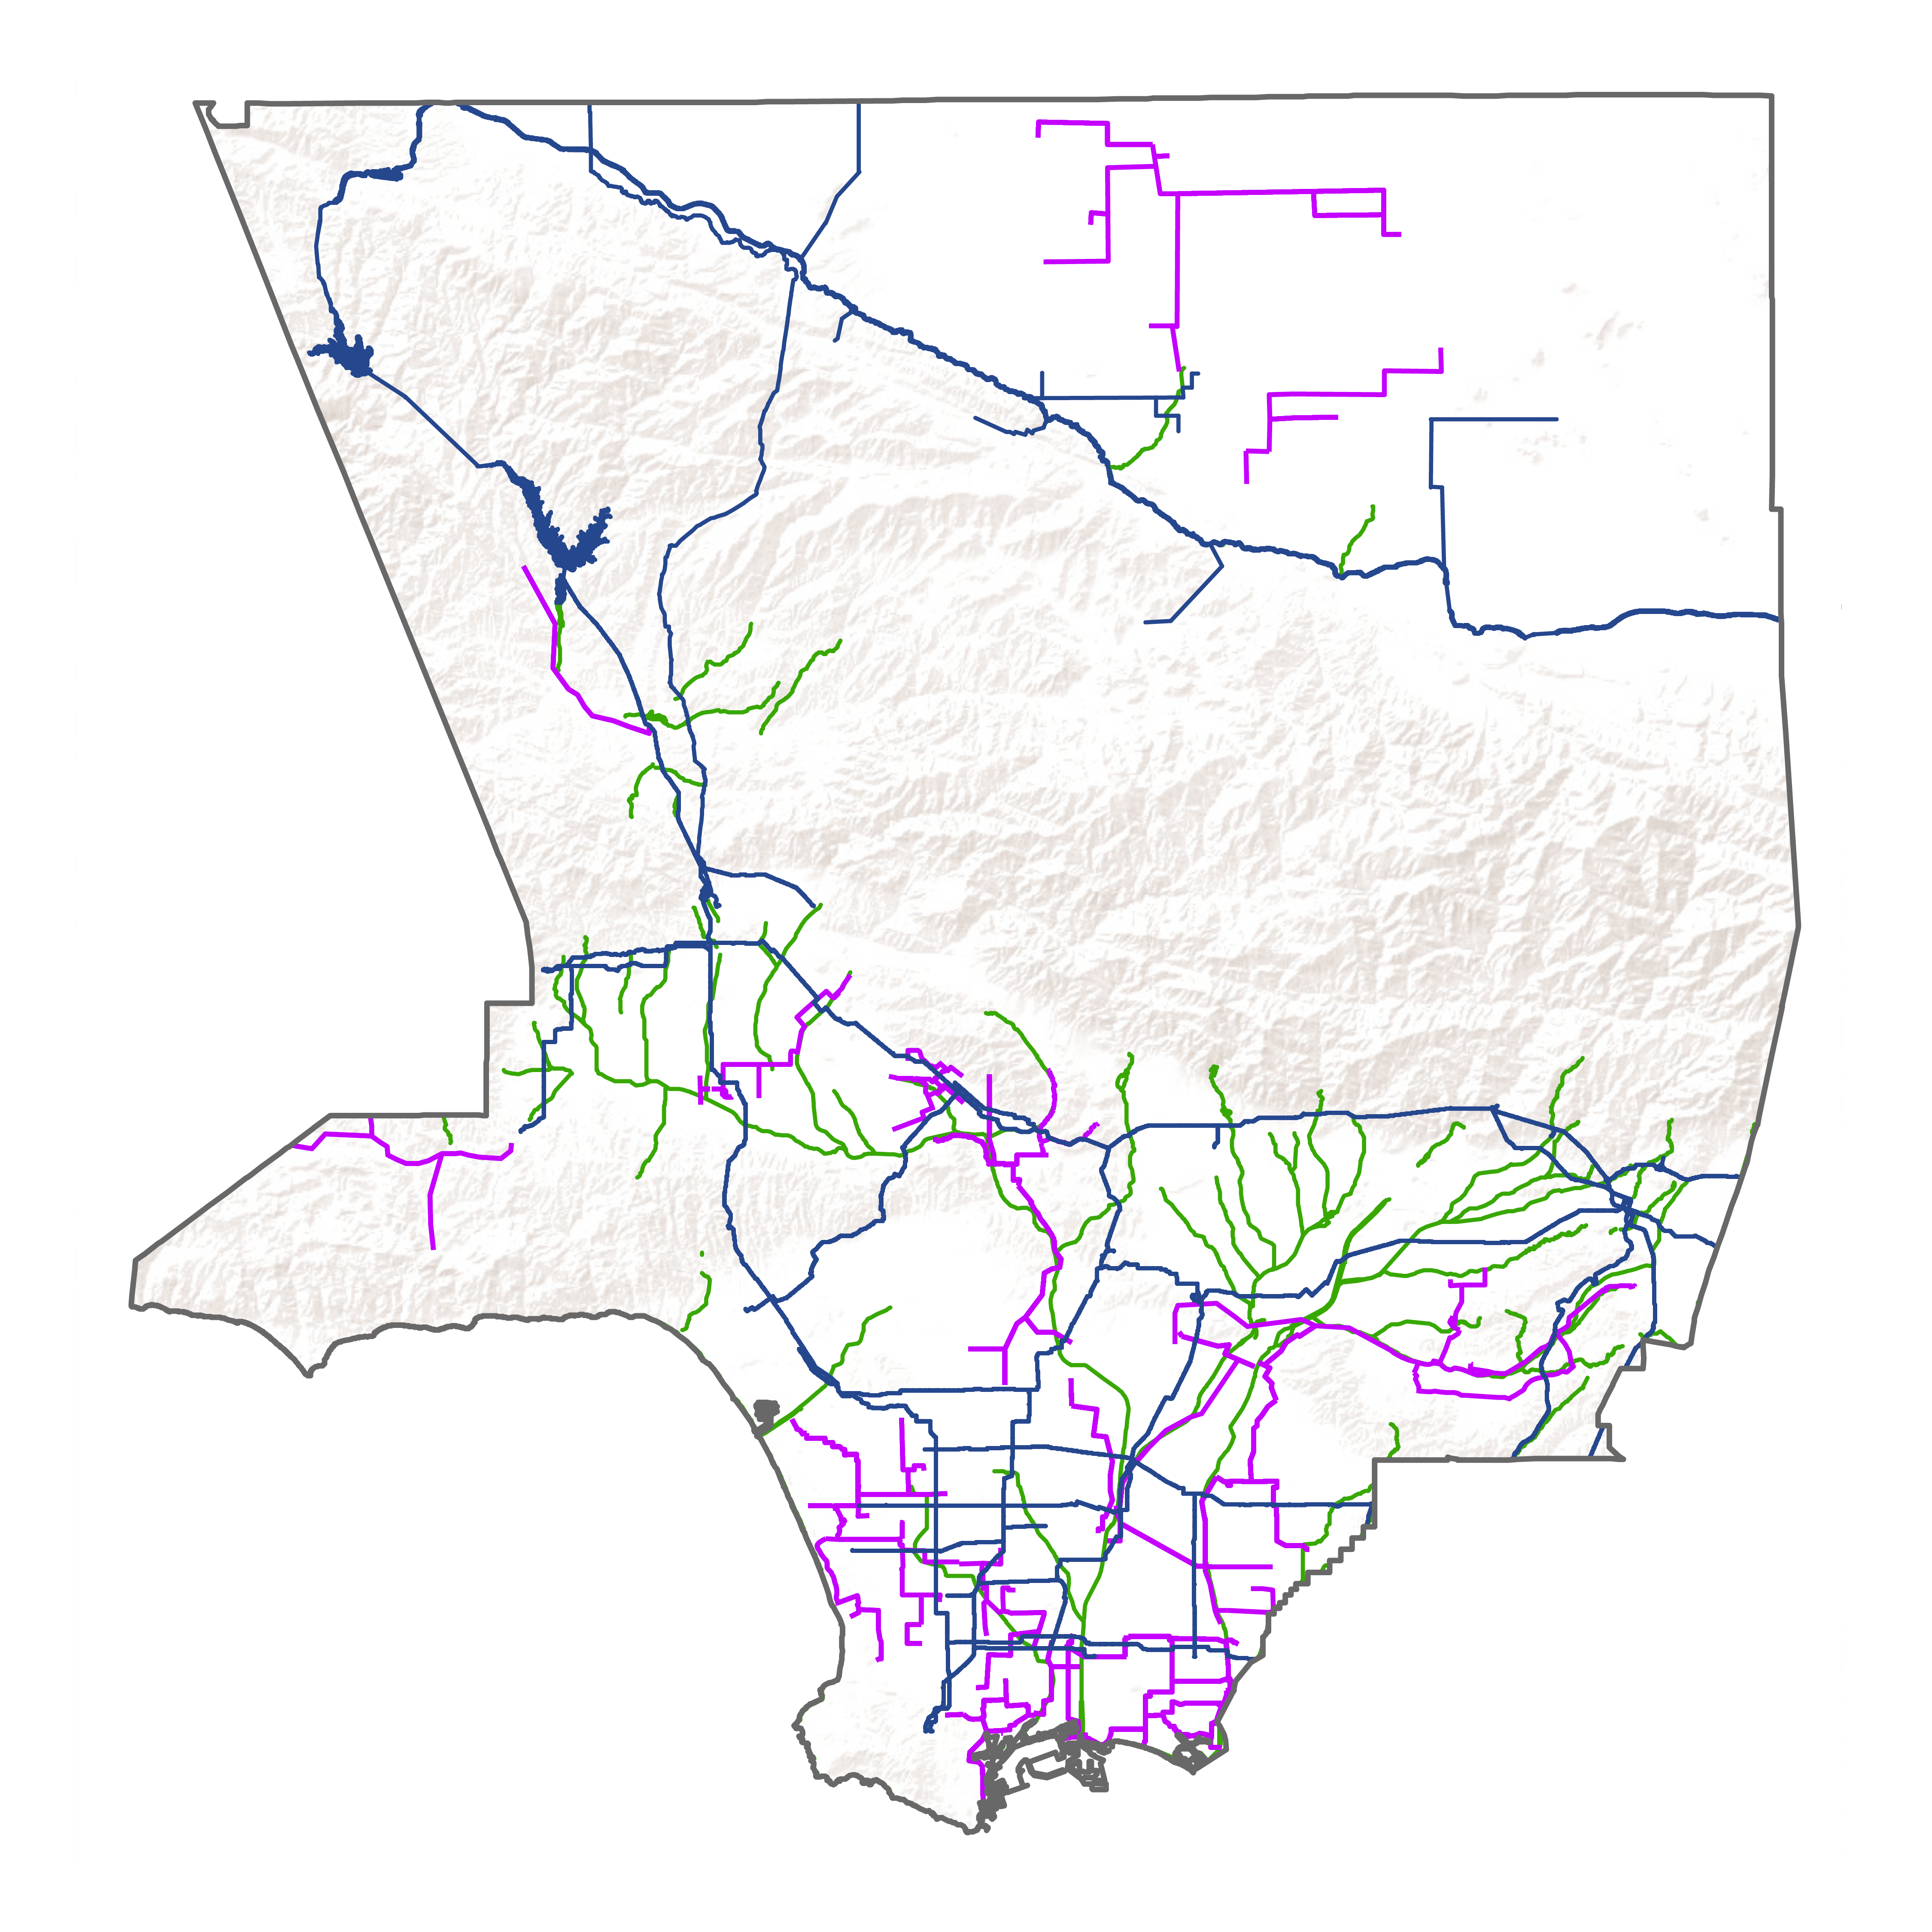 A map of LA county that showcases different rivers and recycled water pipeline alignments in LA county